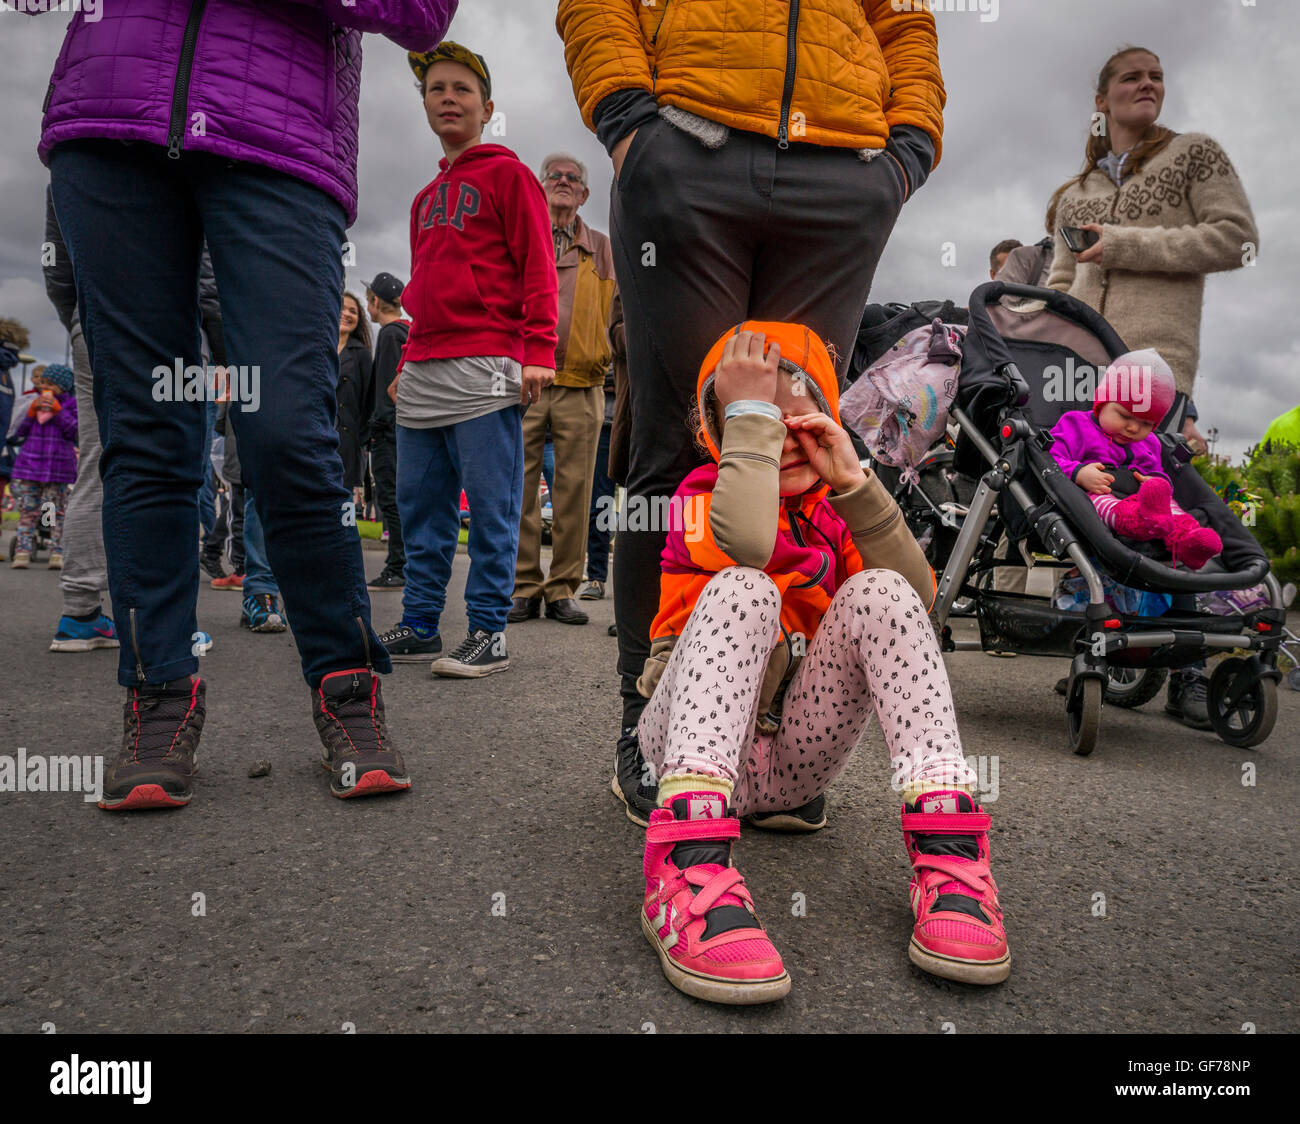 Young girl crying on the ground at The Annual Seaman's Festival, Hafnarfjordur, Iceland Stock Photo